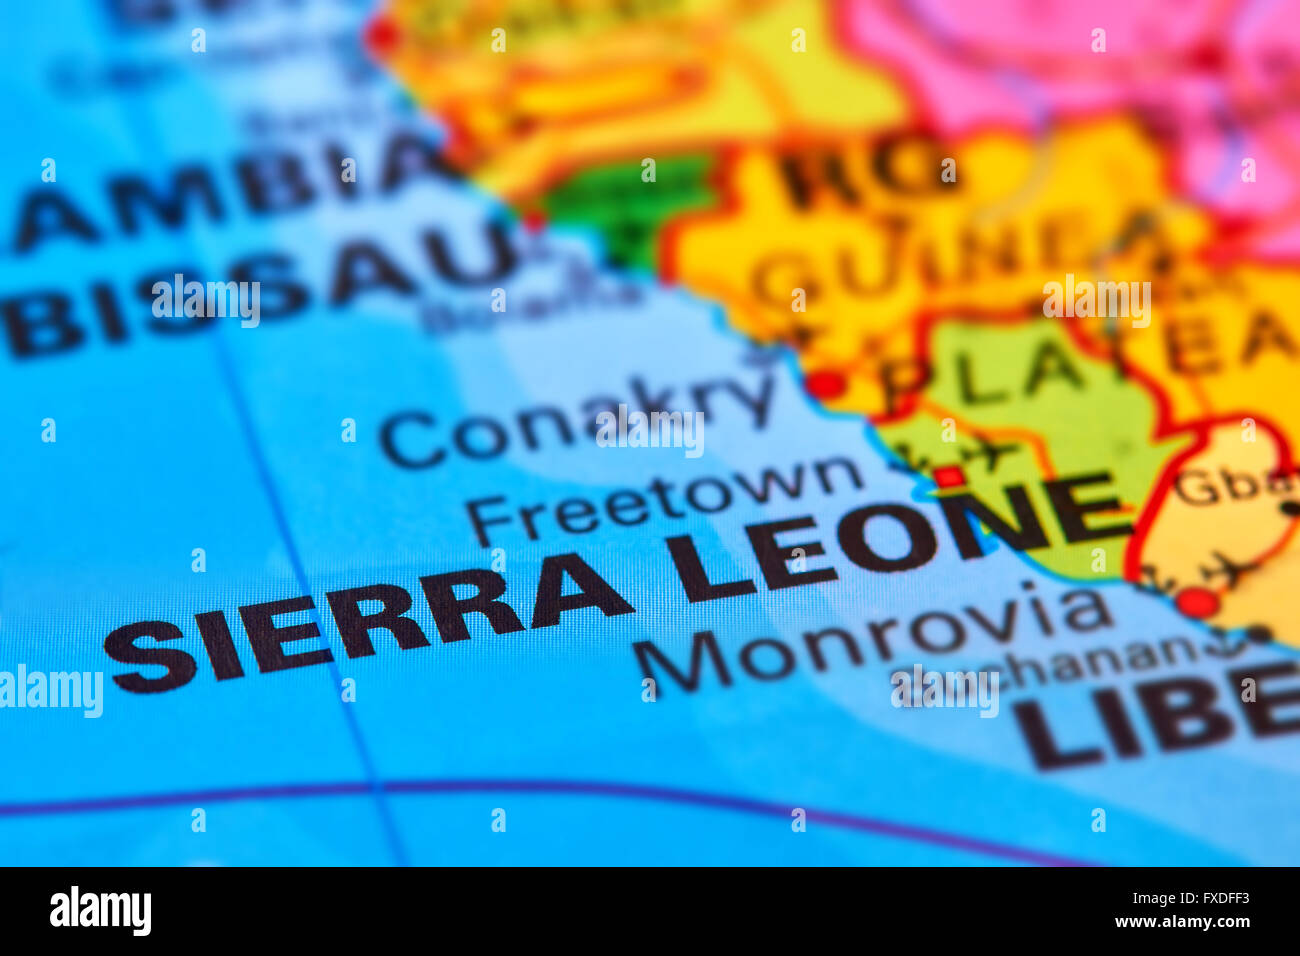 Sierra Leone Country in Africa on the World Map Stock Photo